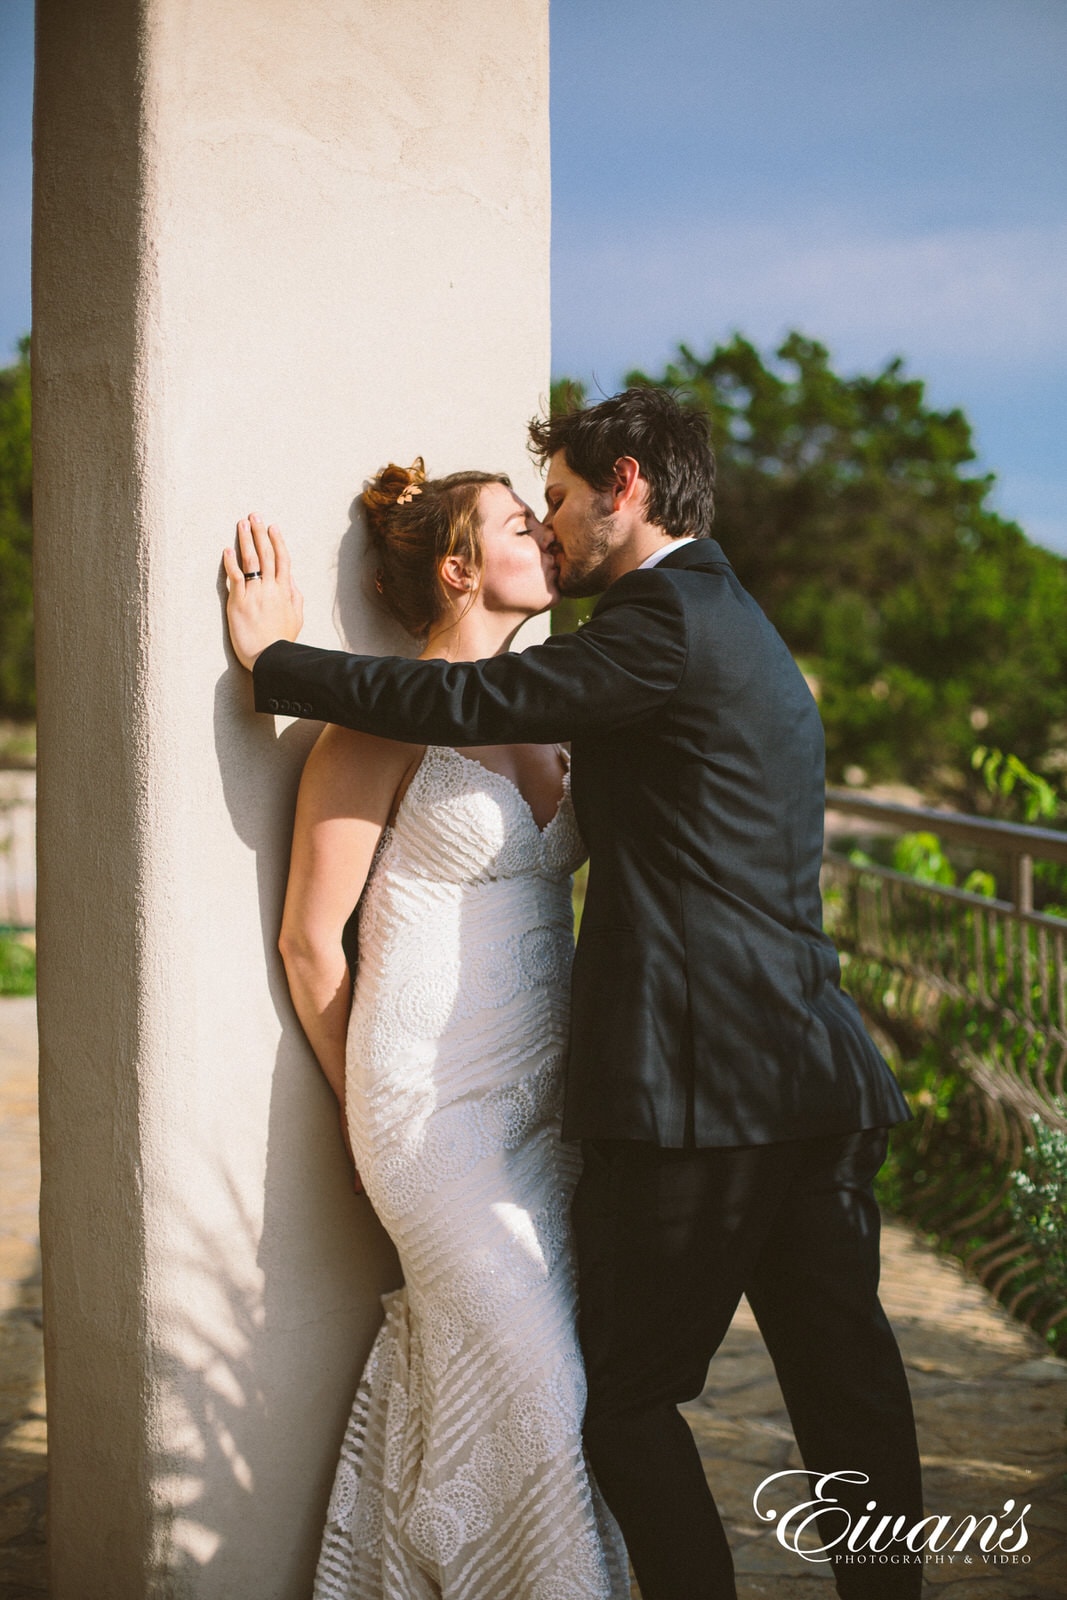 man in black suit kissing woman in white dress